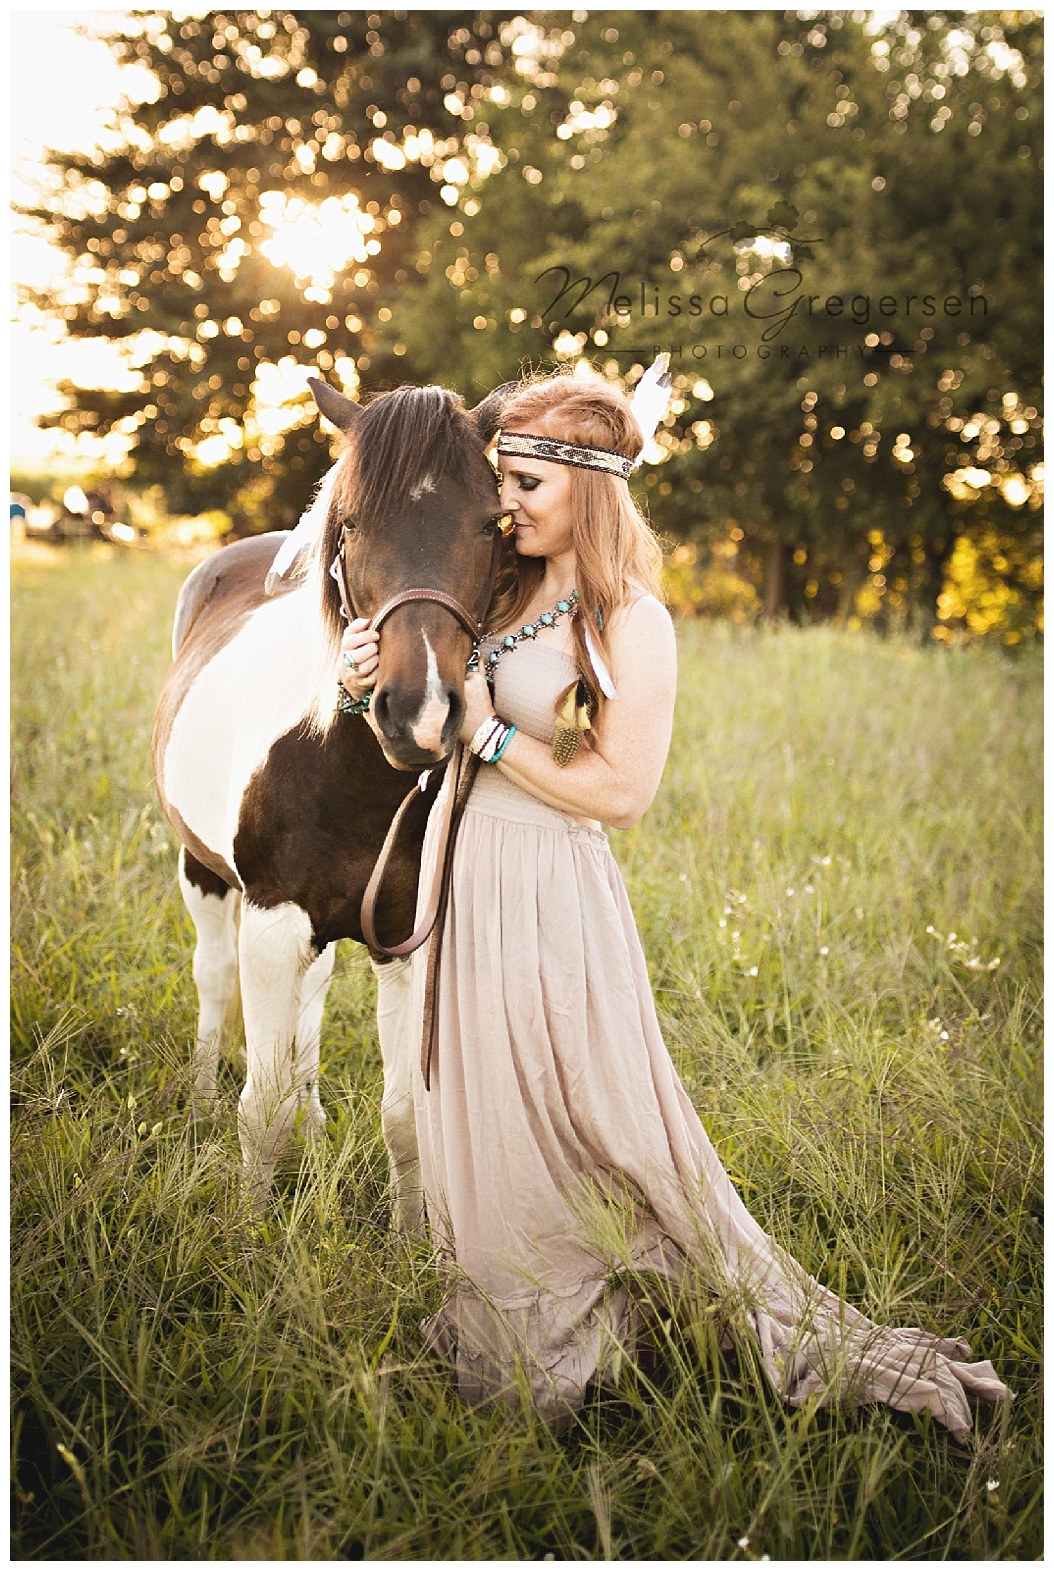 The love of a horse is undeniable in this gorgeous image.